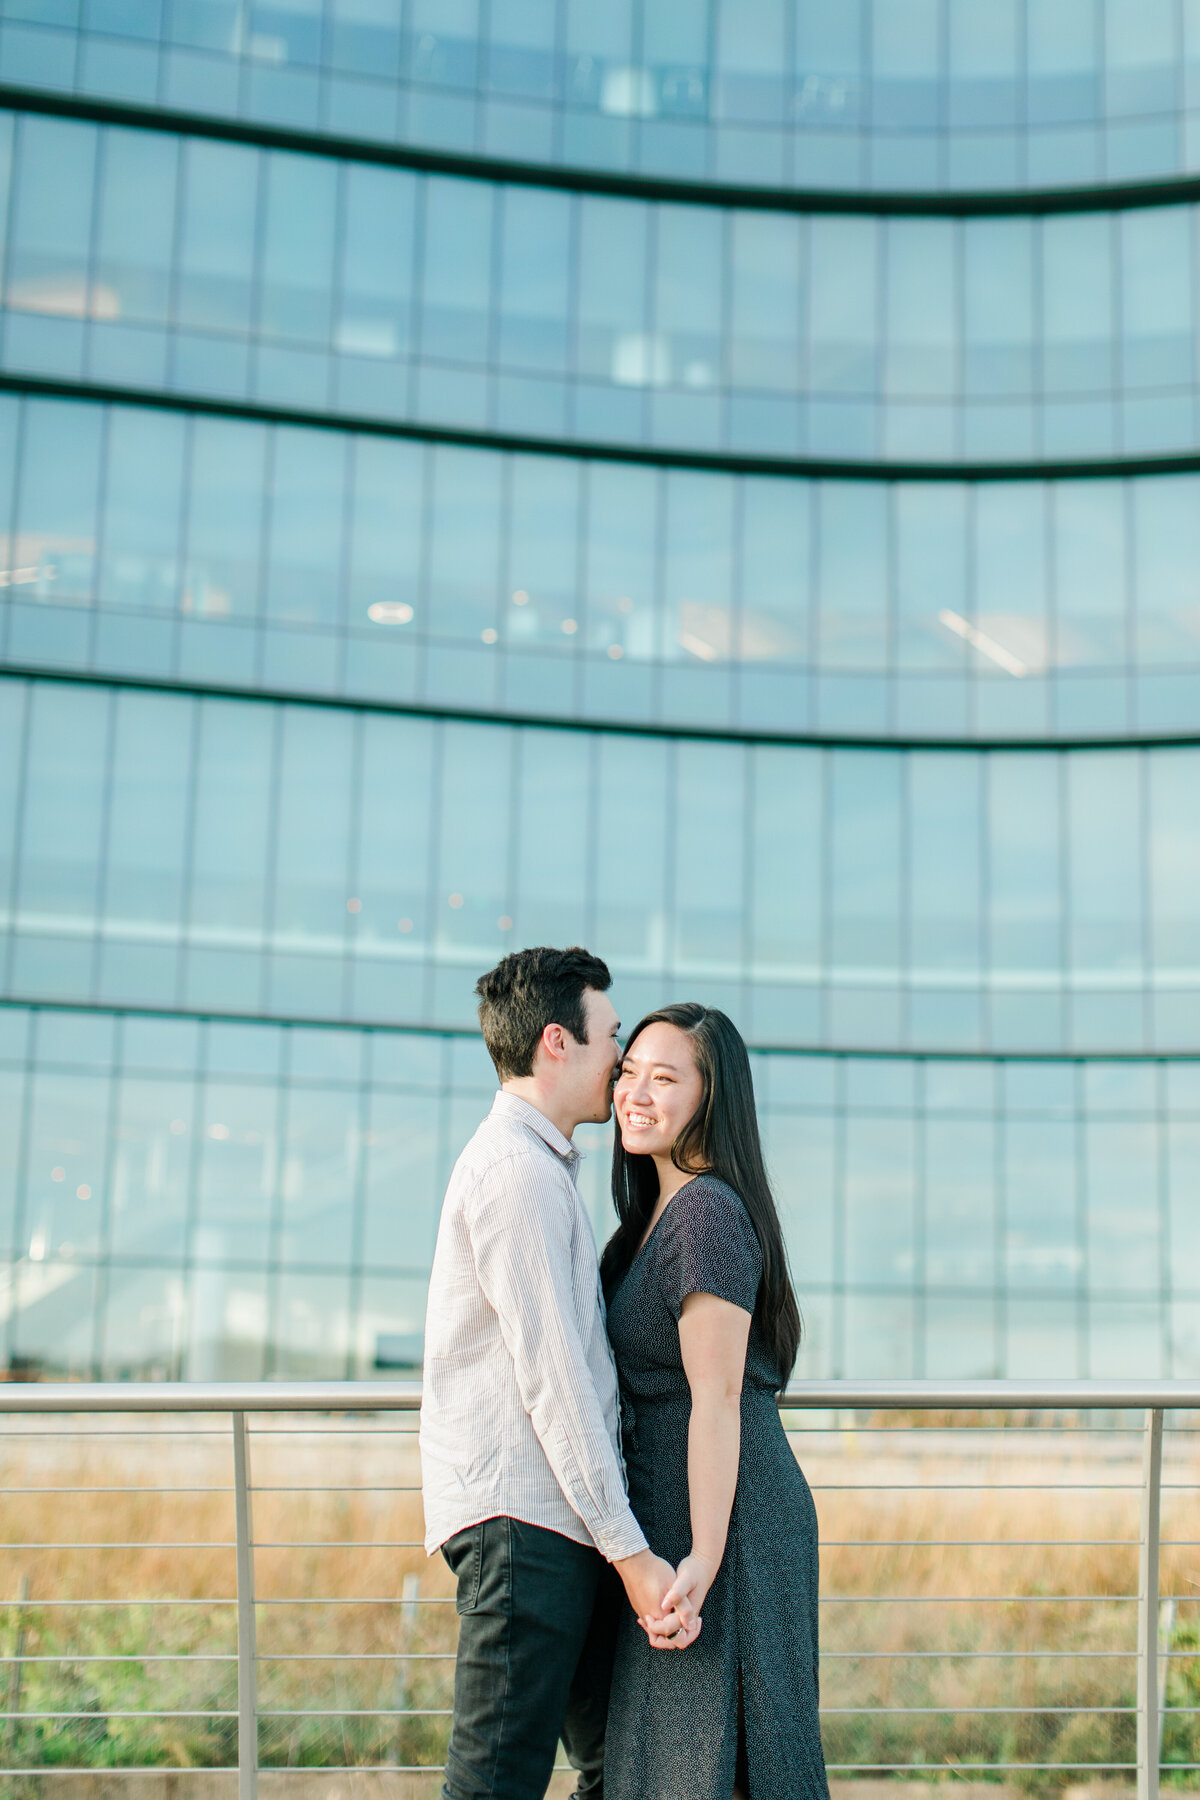 Becky_Collin_Navy_Yards_Park_The_Wharf_Washington_DC_Fall_Engagement_Session_AngelikaJohnsPhotography-7686